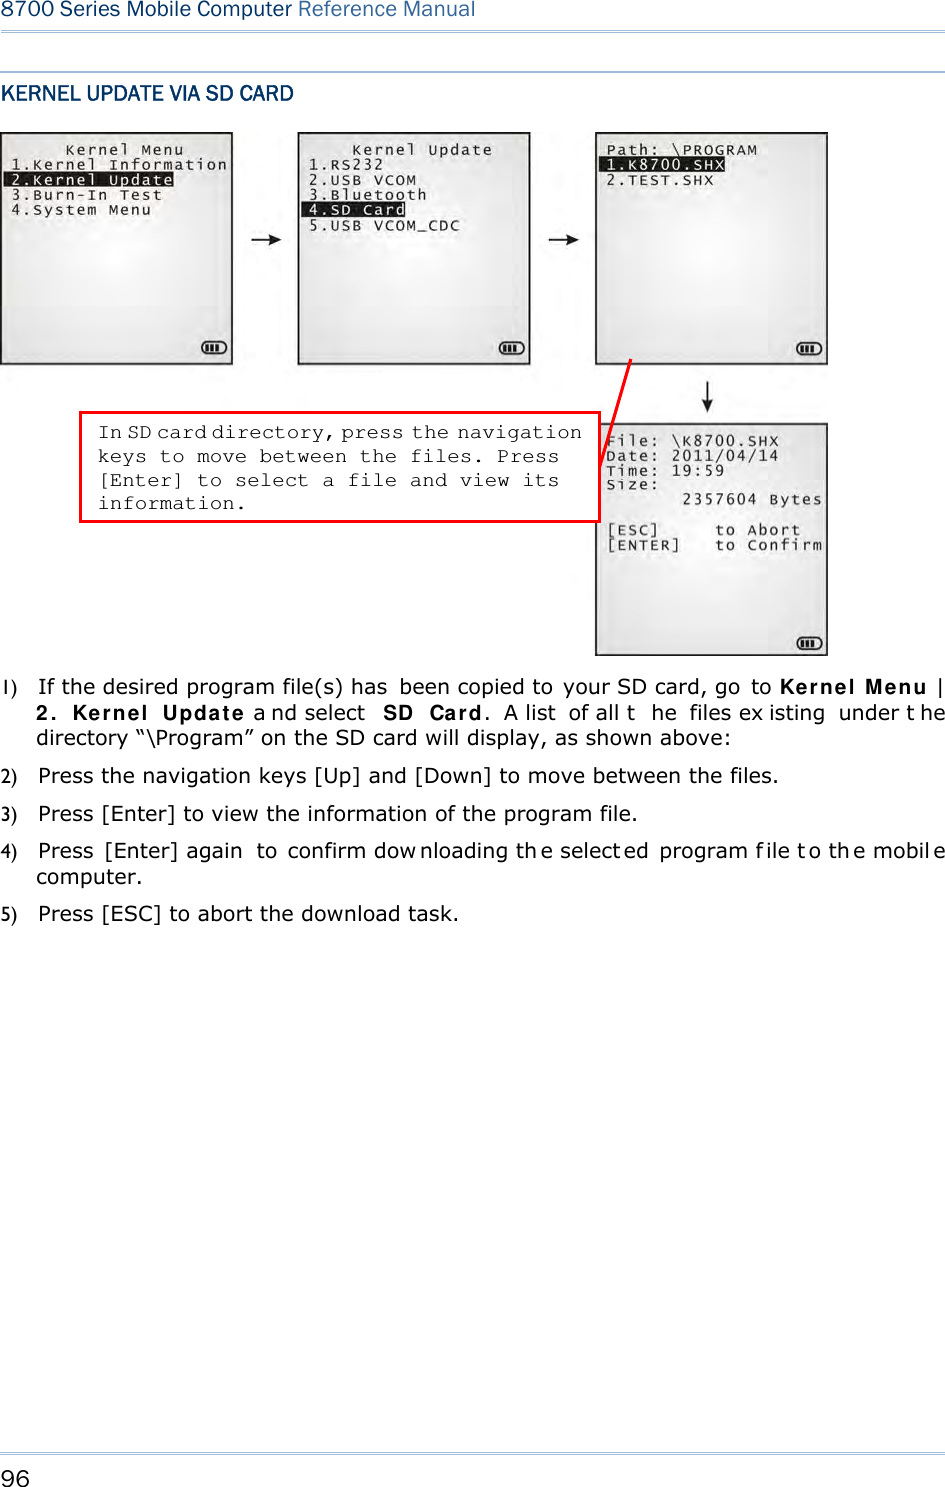 96  8700 Series Mobile Computer Reference Manual  KERNEL UPDATE VIA SD CARD  1) If the desired program file(s) has  been copied to your SD card, go to Kernel Menu | 2. Kernel Update a nd select  SD Card. A list  of all t he files ex isting under t he directory “\Program” on the SD card will display, as shown above: 2) Press the navigation keys [Up] and [Down] to move between the files. 3) Press [Enter] to view the information of the program file. 4) Press [Enter] again  to confirm dow nloading th e select ed program f ile t o th e mobil e computer. 5) Press [ESC] to abort the download task.  In SD card directory, press the navigation keys to move between the files. Press [Enter] to select a file and view its information. 